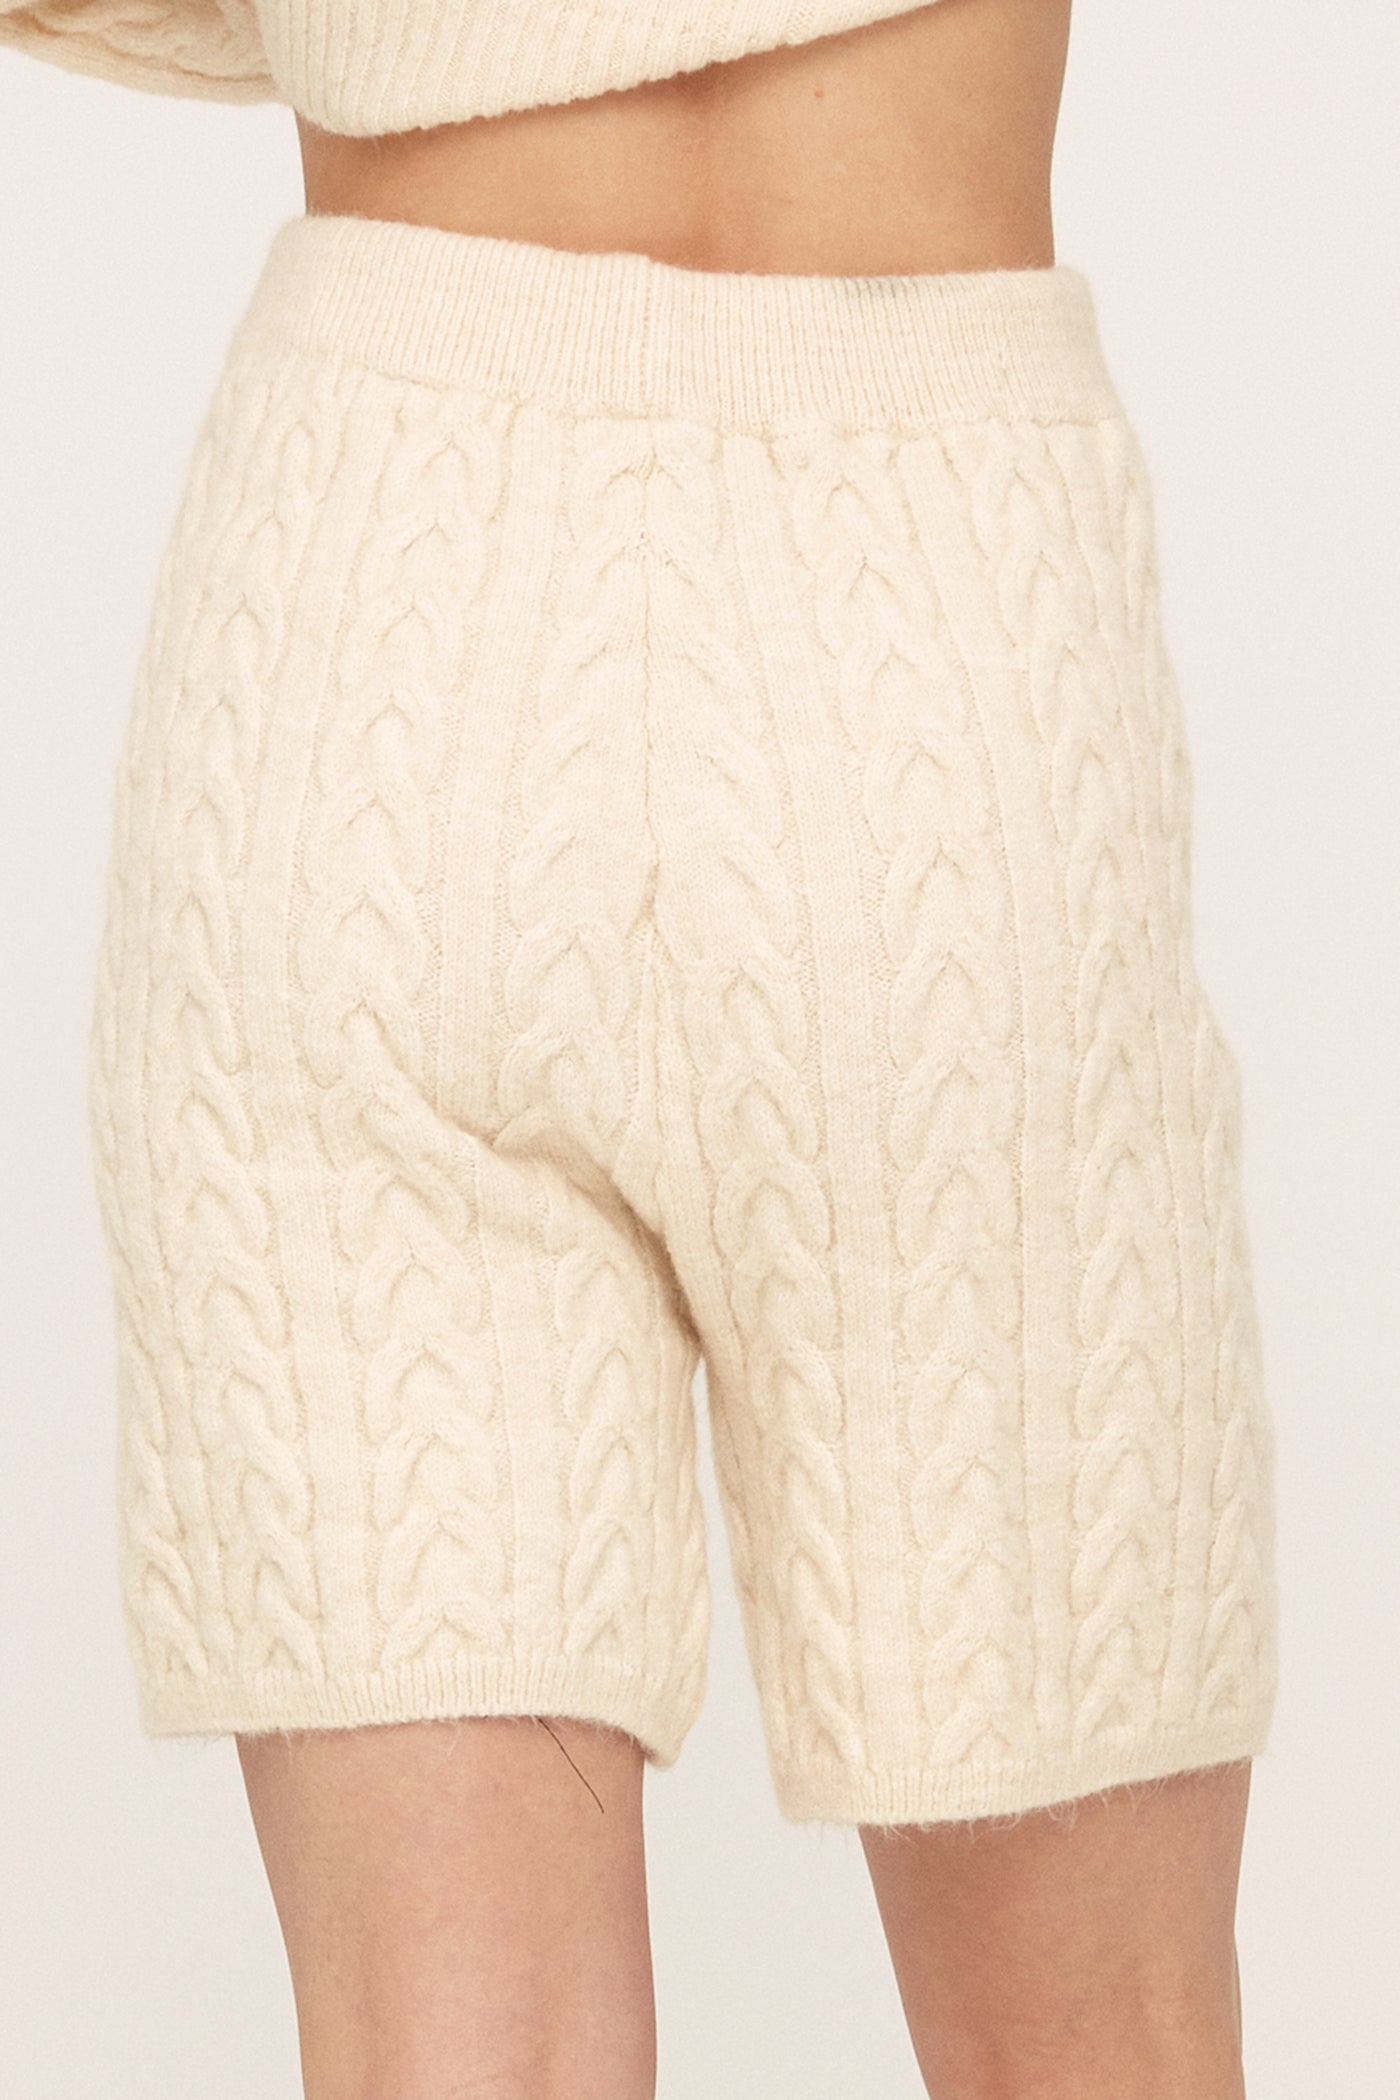 storets.com Ivy Cable Sweater n Shorts Set